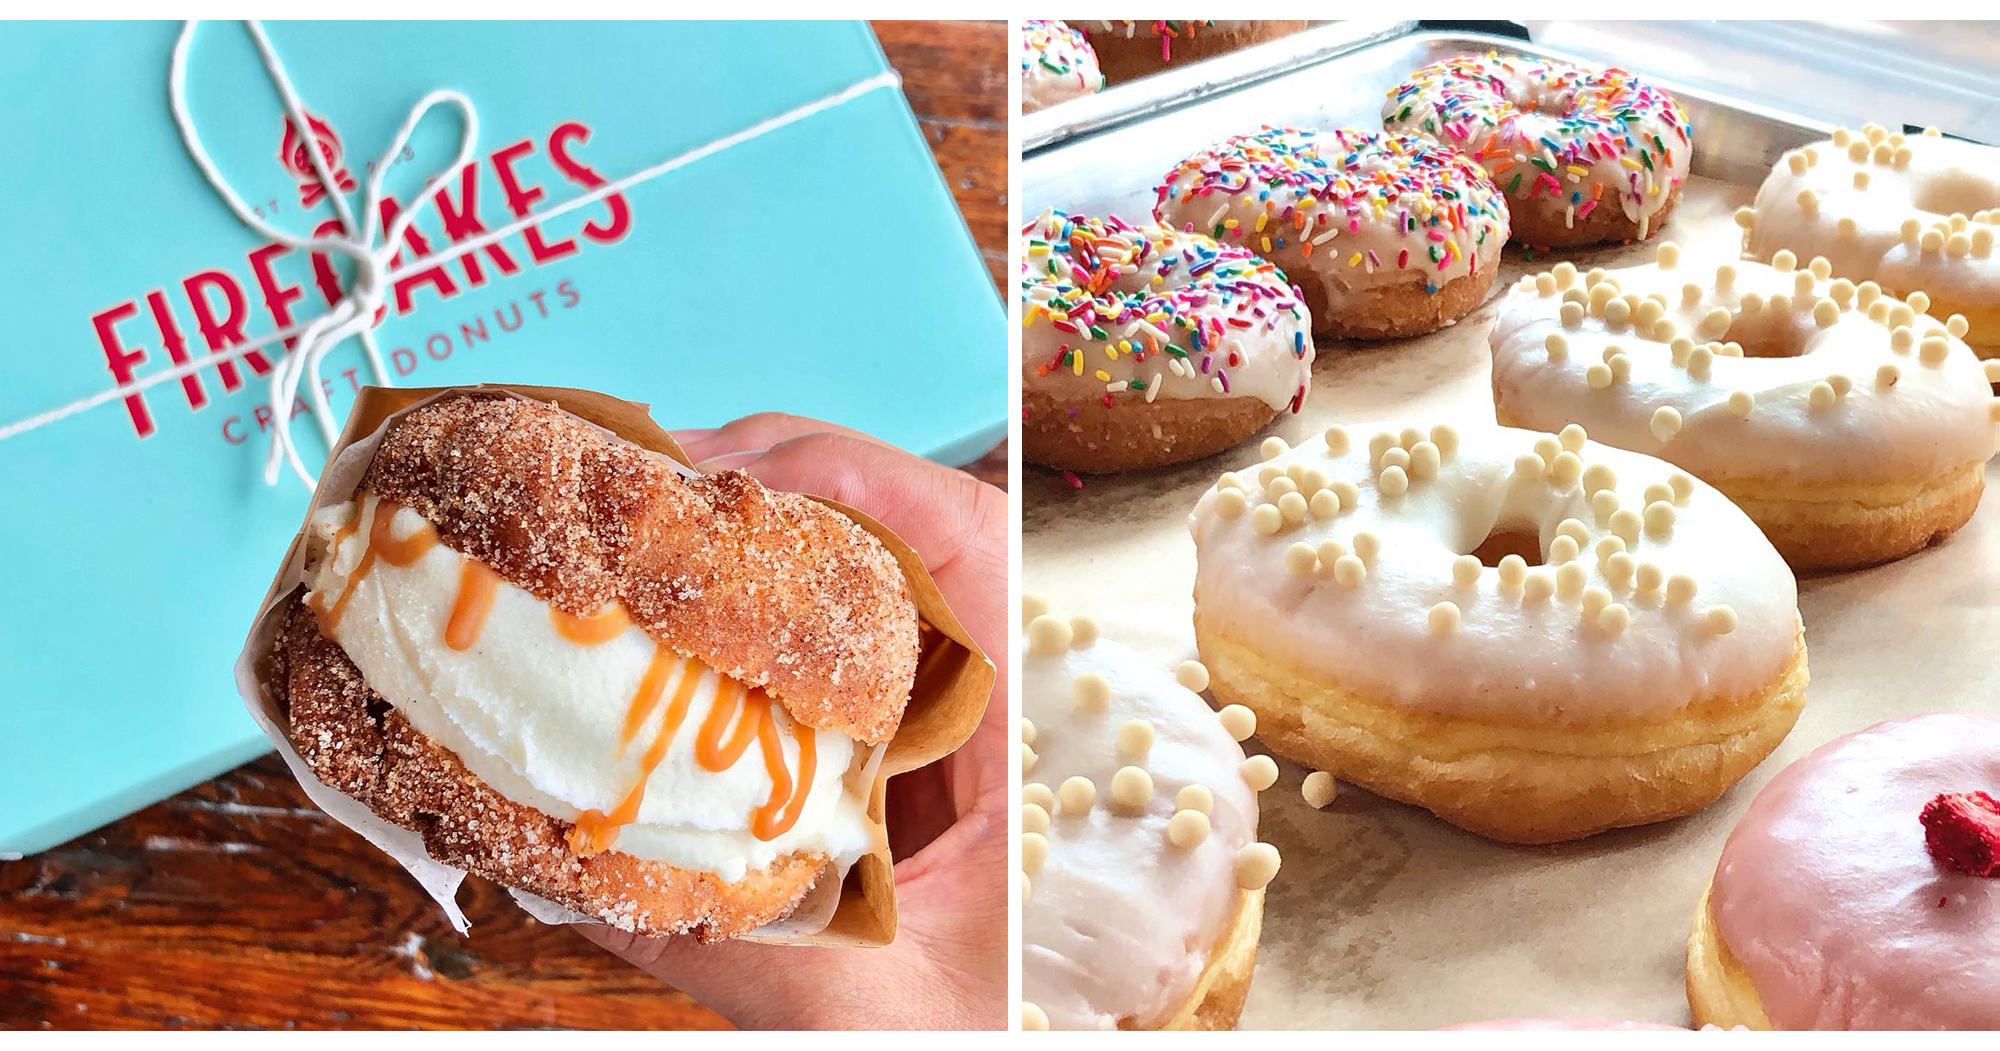 firecakes_donut collage.png